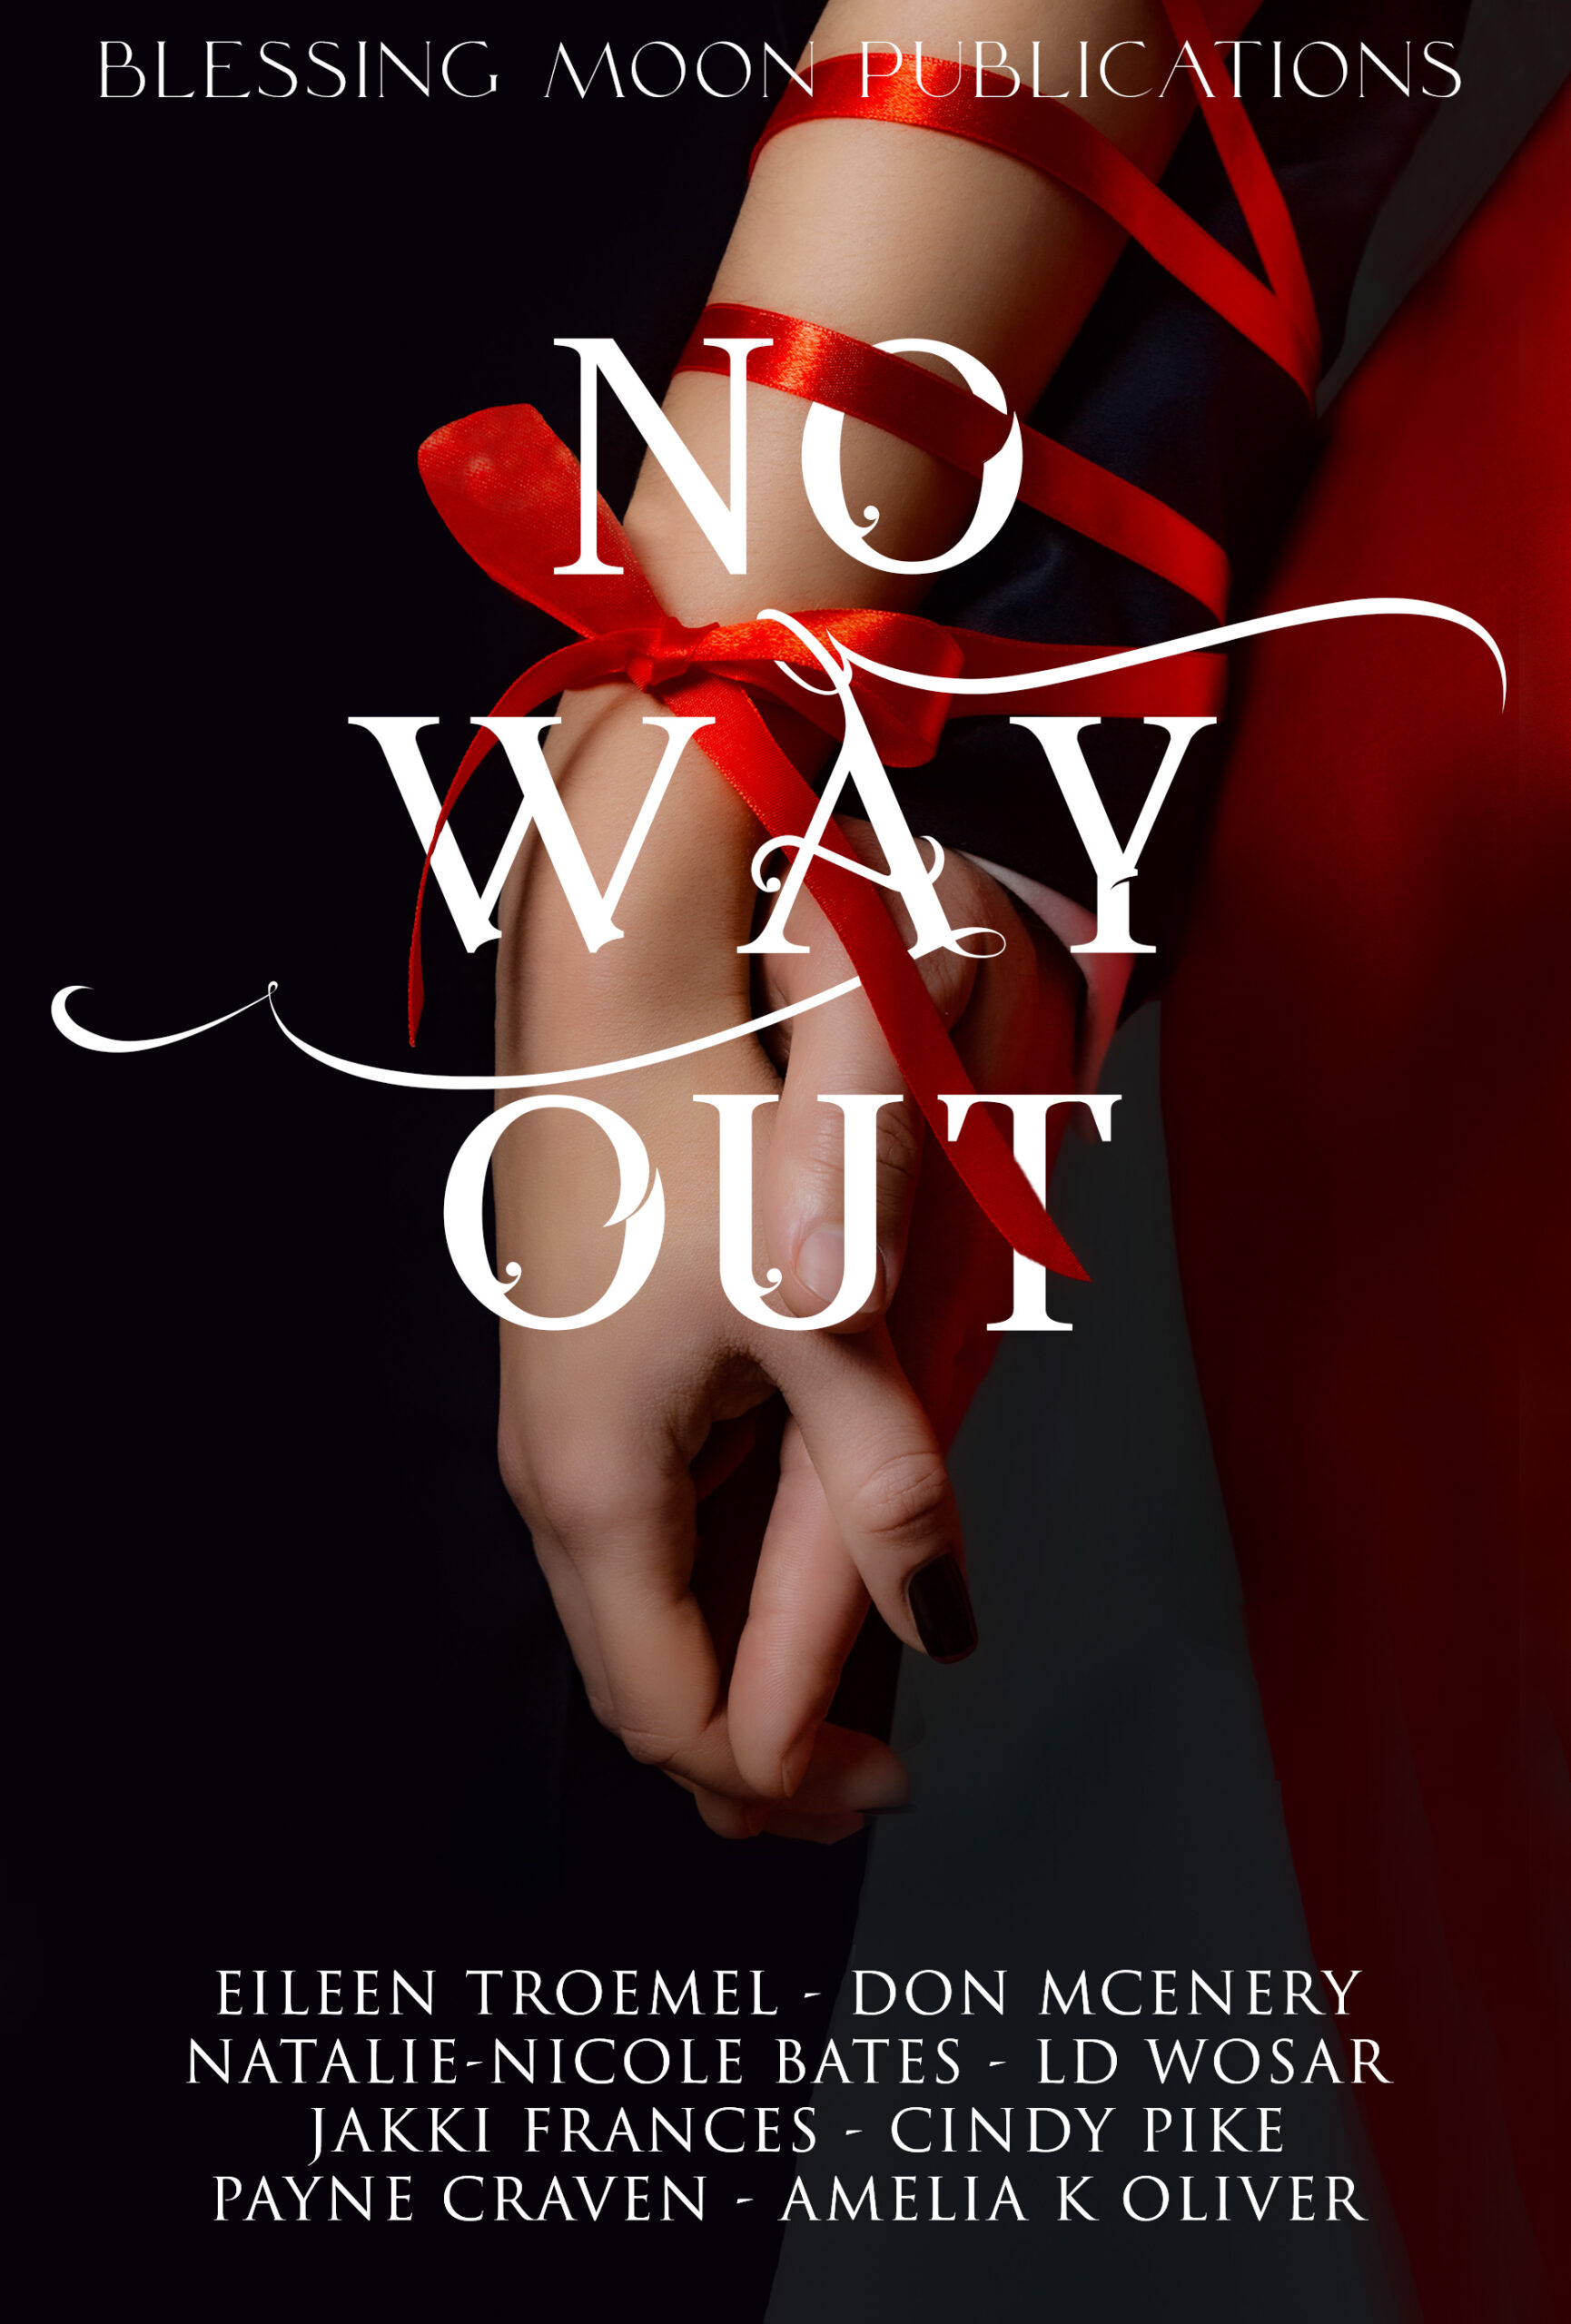 FREE: No Way Out by blessing moon publications